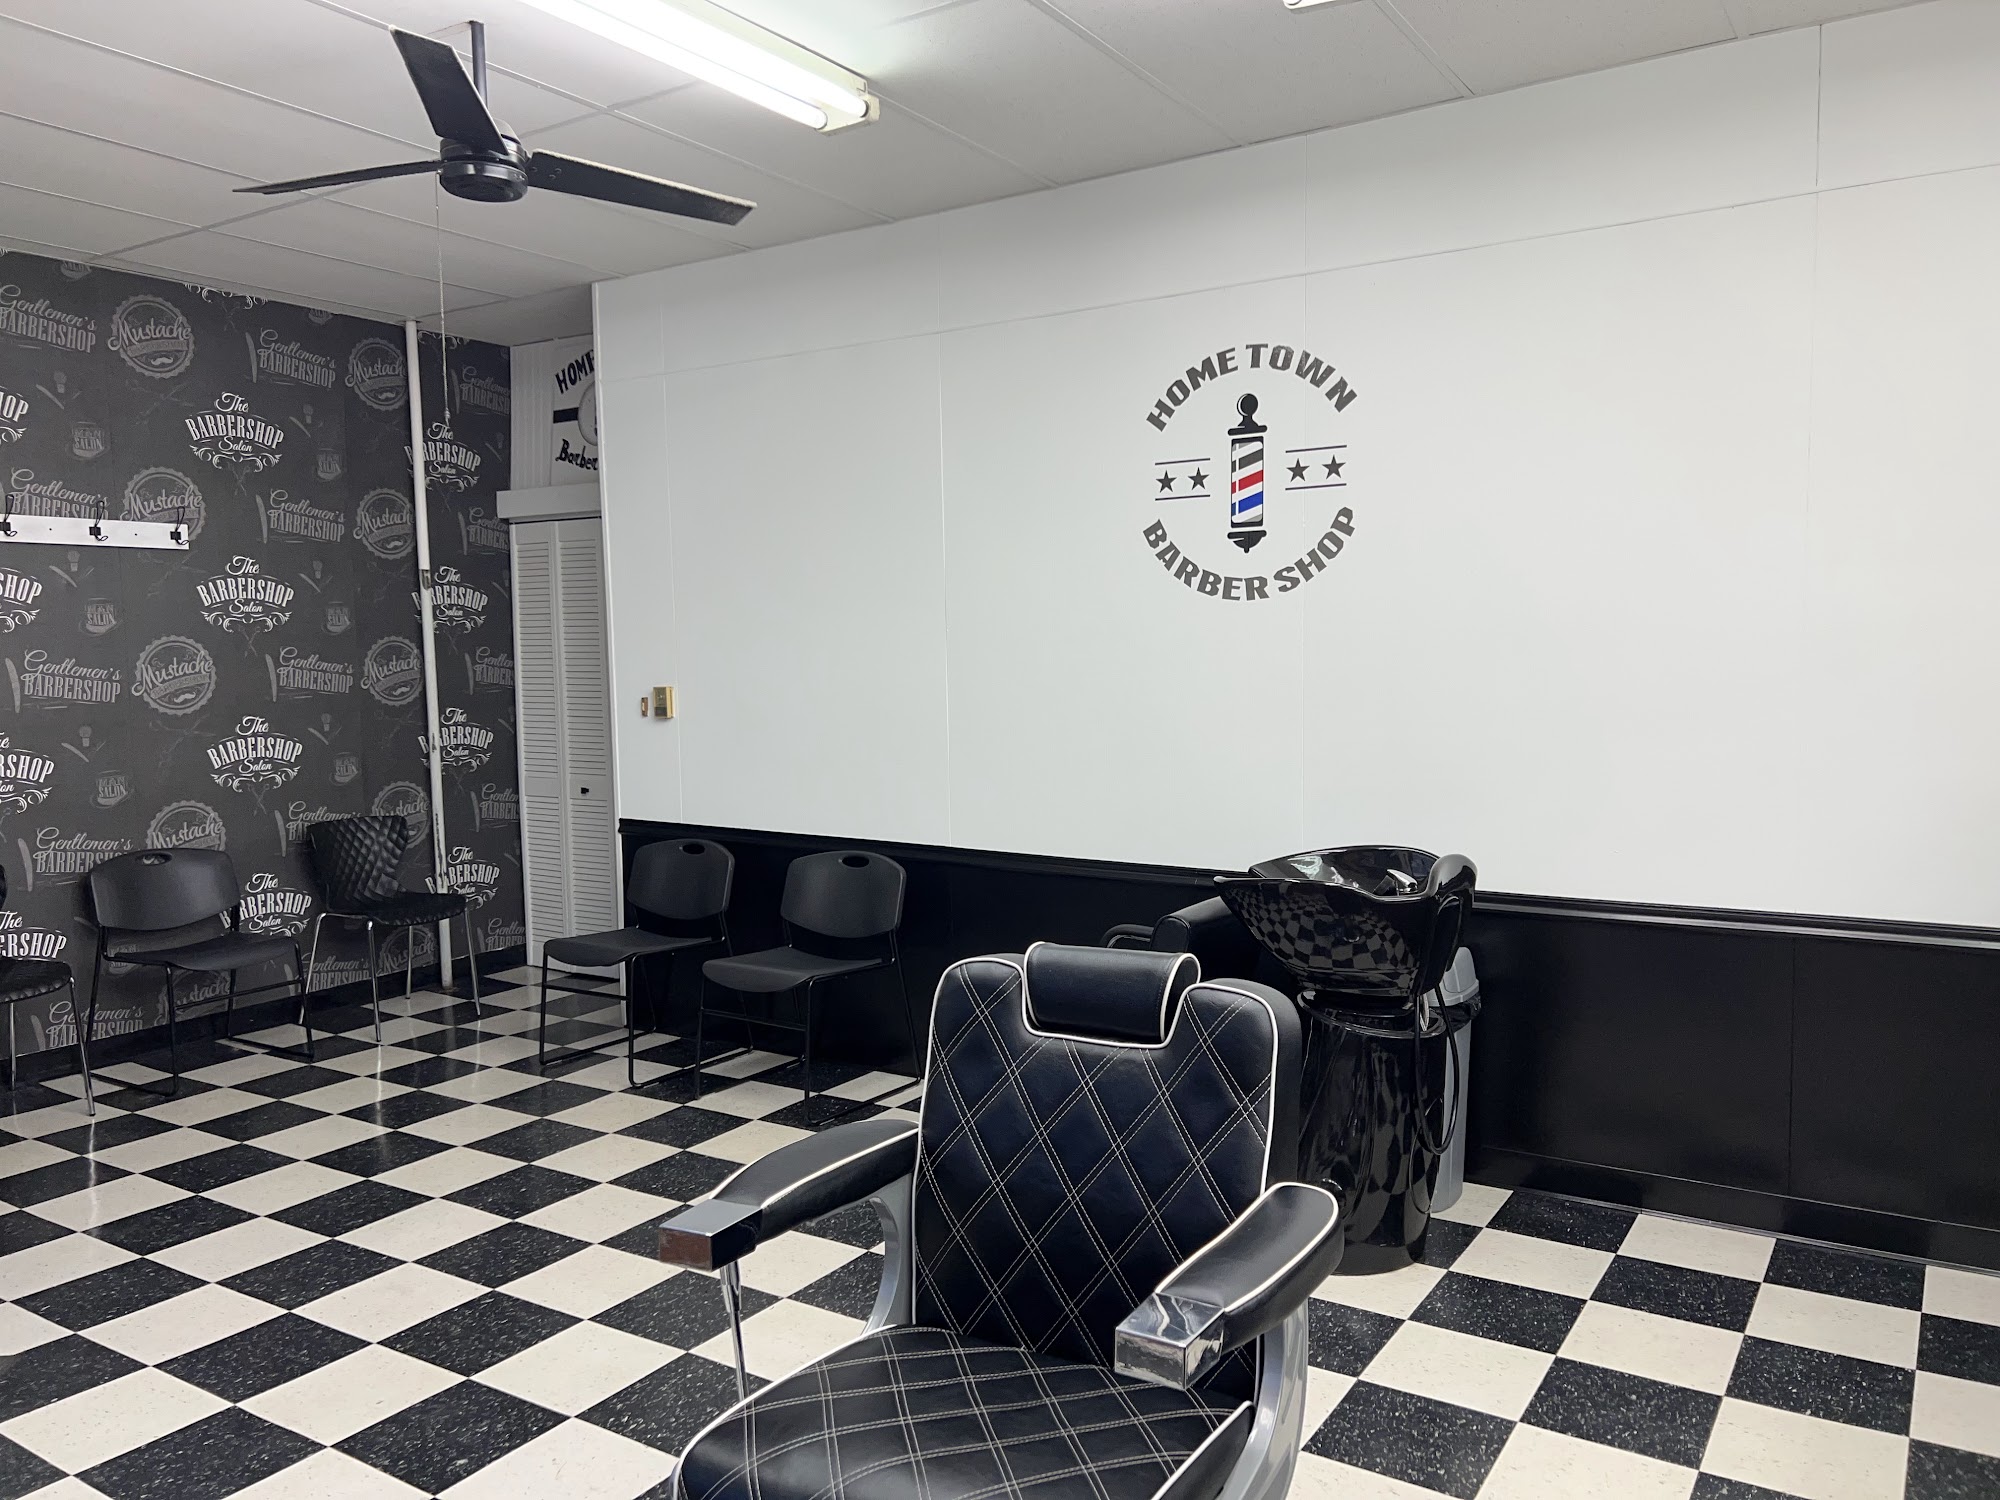 Home Town Barber Shop 125 W Lincoln Ave, Hinckley Illinois 60520